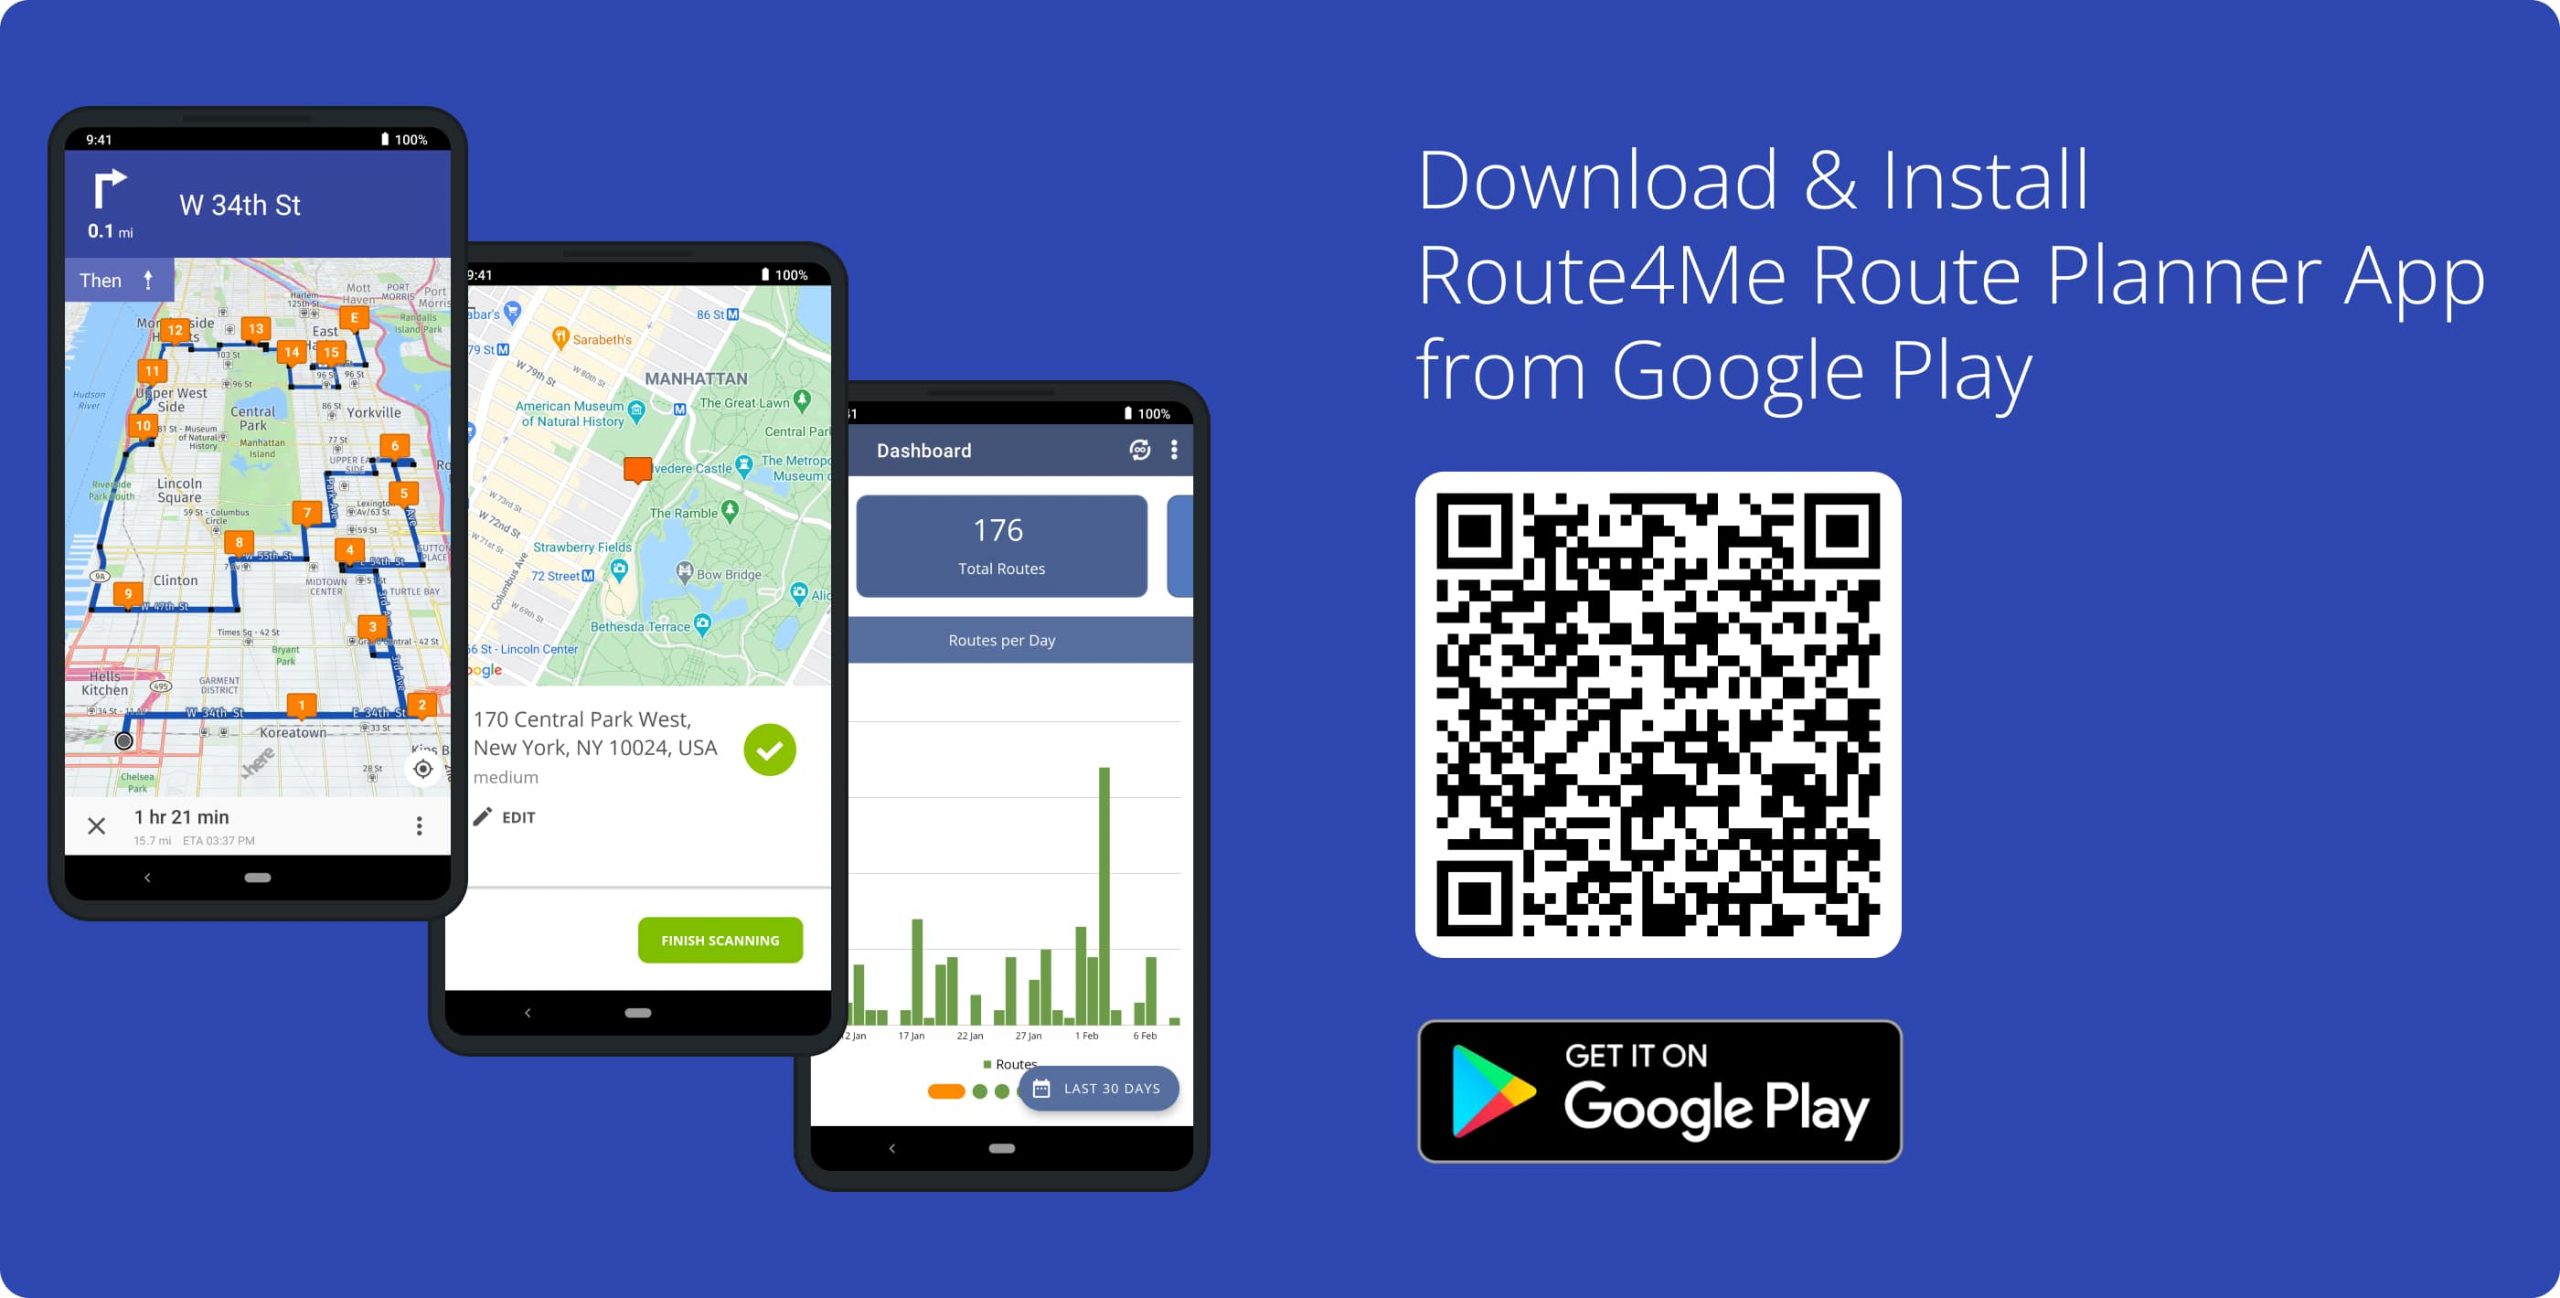 Download and install Route4Me's Android Route Planner app on your smartphone or tablet from Google Play.